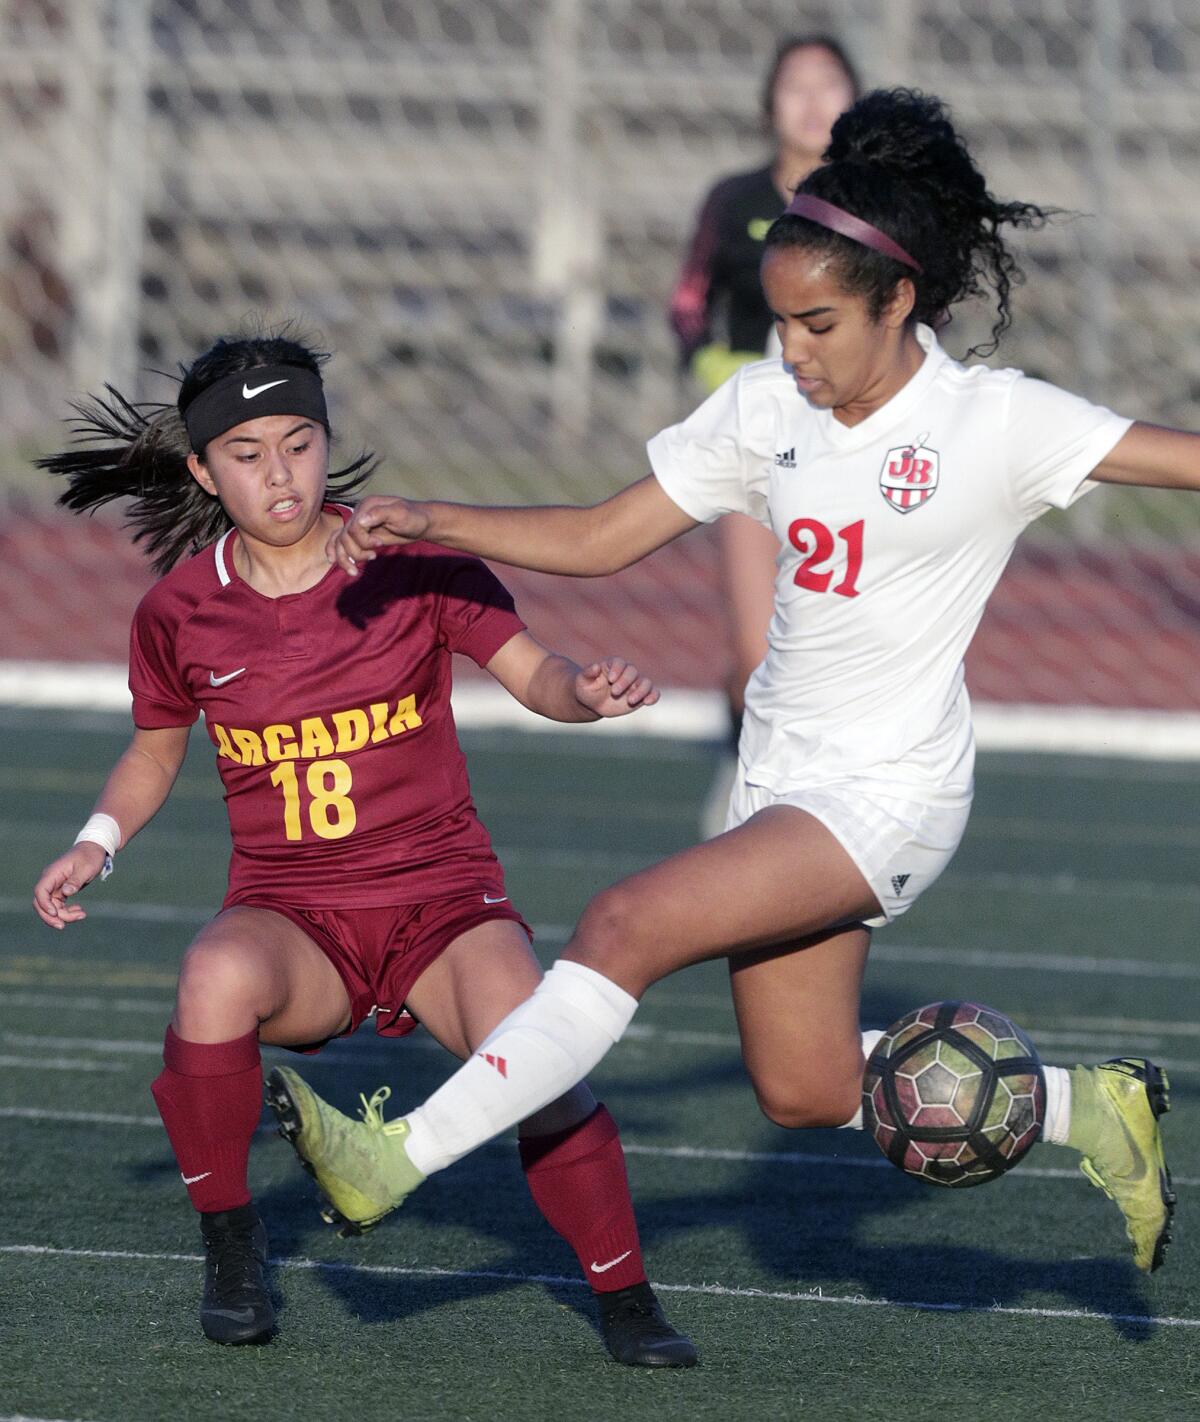 Arcadia's Kayla Noda just clears the ball before Burroughs' Lauryn Bailey reaches her in a Pacific League girls' soccer game at Arcadia High School in Arcadia on Tuesday, January 28, 2020.